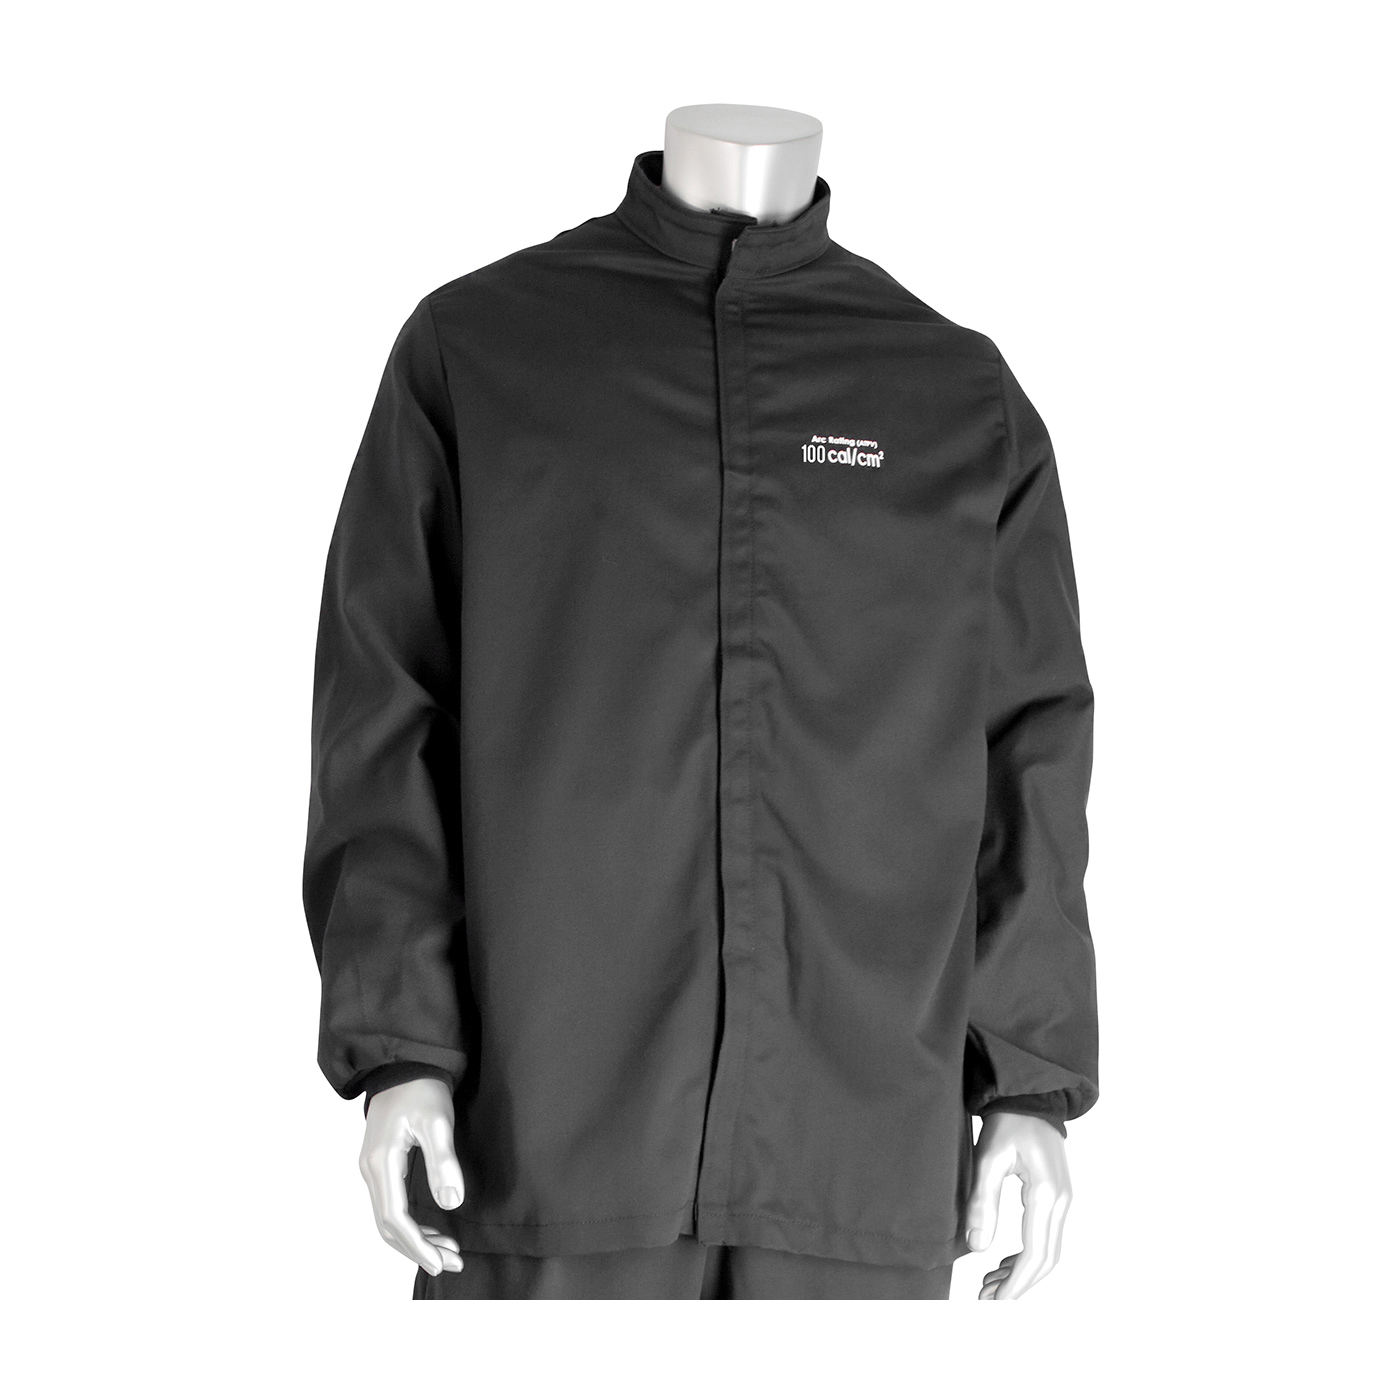 PIP® 9100-52750/XL Arc and Flame Resistant Jacket, XL, Gray, Aramid/Cotton, 48 to 50 in Chest, Resists: Arc and Flame, ASTM F1506-10a, ASTM F2178-12